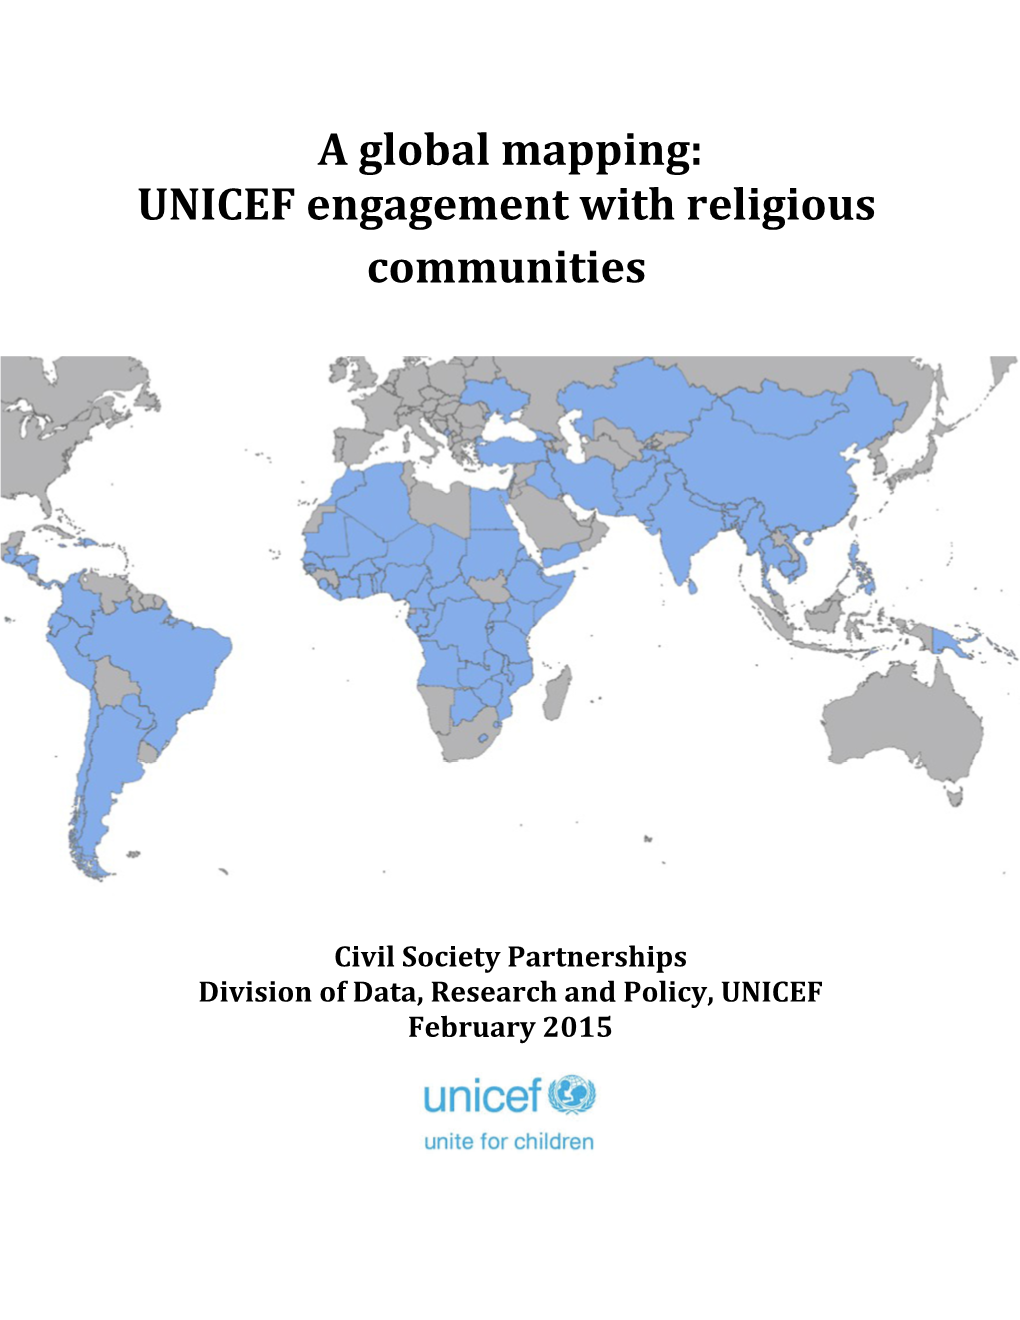 UNICEF Engagement with Religious Communities